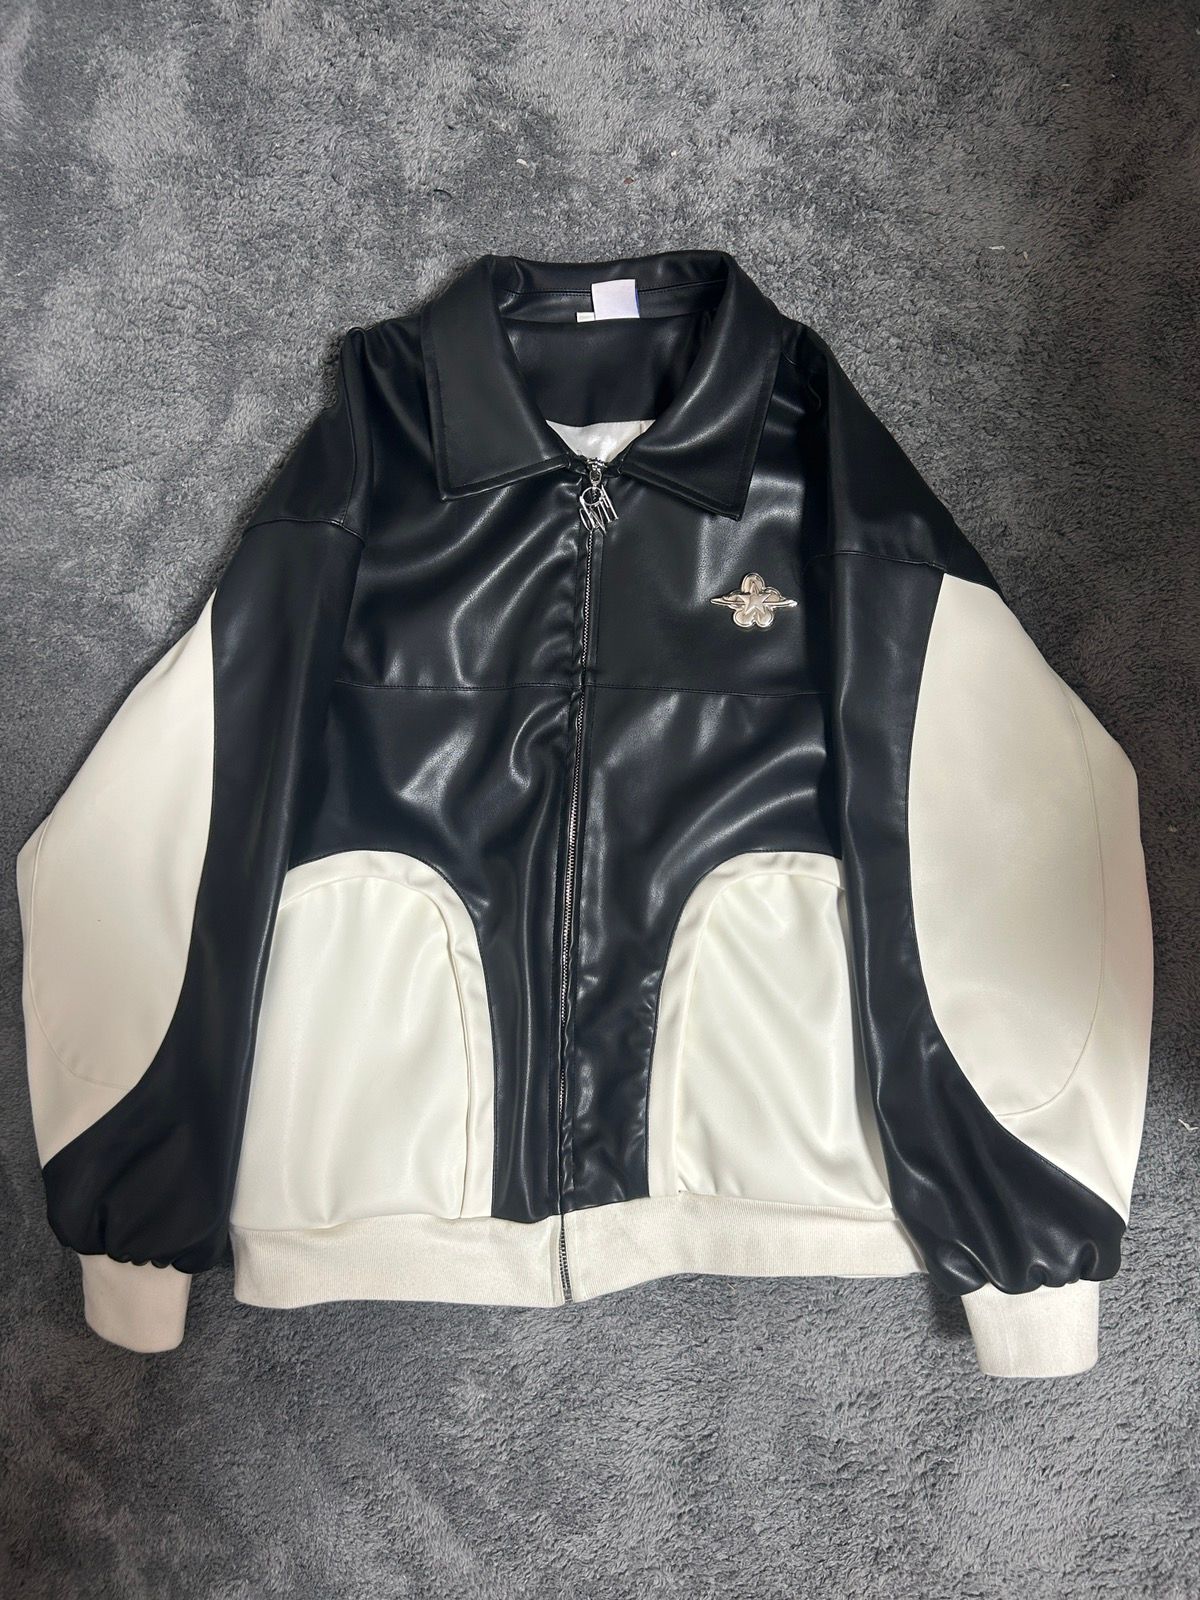 Archival Clothing Davril AA Space Jacket | Grailed